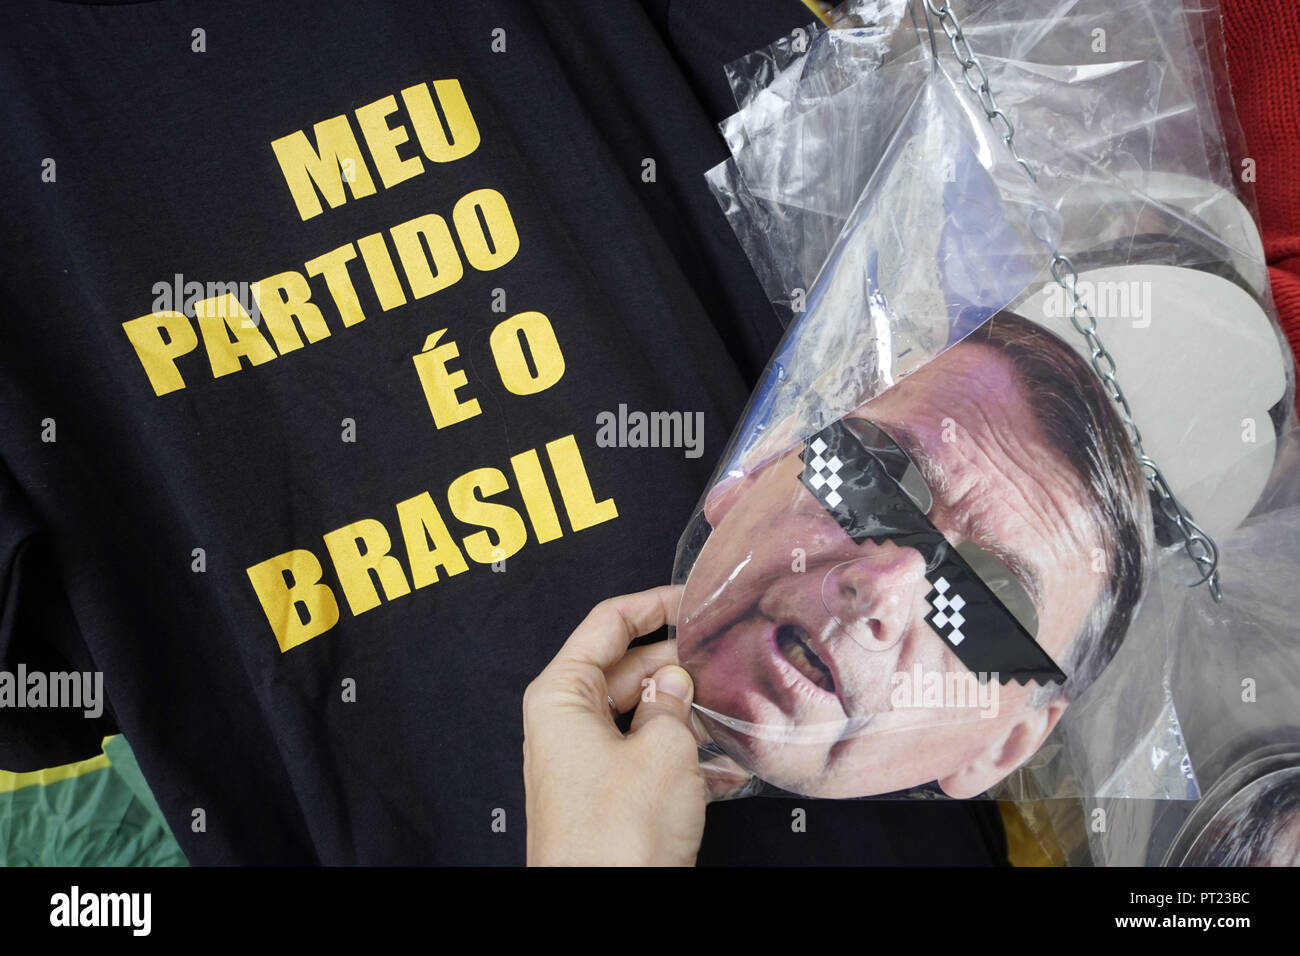 Sao Paulo, Brazil. 6 October 2018. On the eve of the election for the Brazilian Presidency, an important shopping center in SÃ£o Paulo sells t-shirts and masks by Jair Bolsonaro.The candidate for the presidency of Brazil for the Social Liberal Party (PSL), Jair Messias Bolsonaro, is an old acquaintance of politics who became the hope of millions of Brazilians change the country. Born March 21, 1955, the military in the reserve began his political career in 1988, when he was elected as an alderman in Rio de Janeiro by the Christian Democrati Credit: ZUMA Press, Inc./Alamy Live News Stock Photo